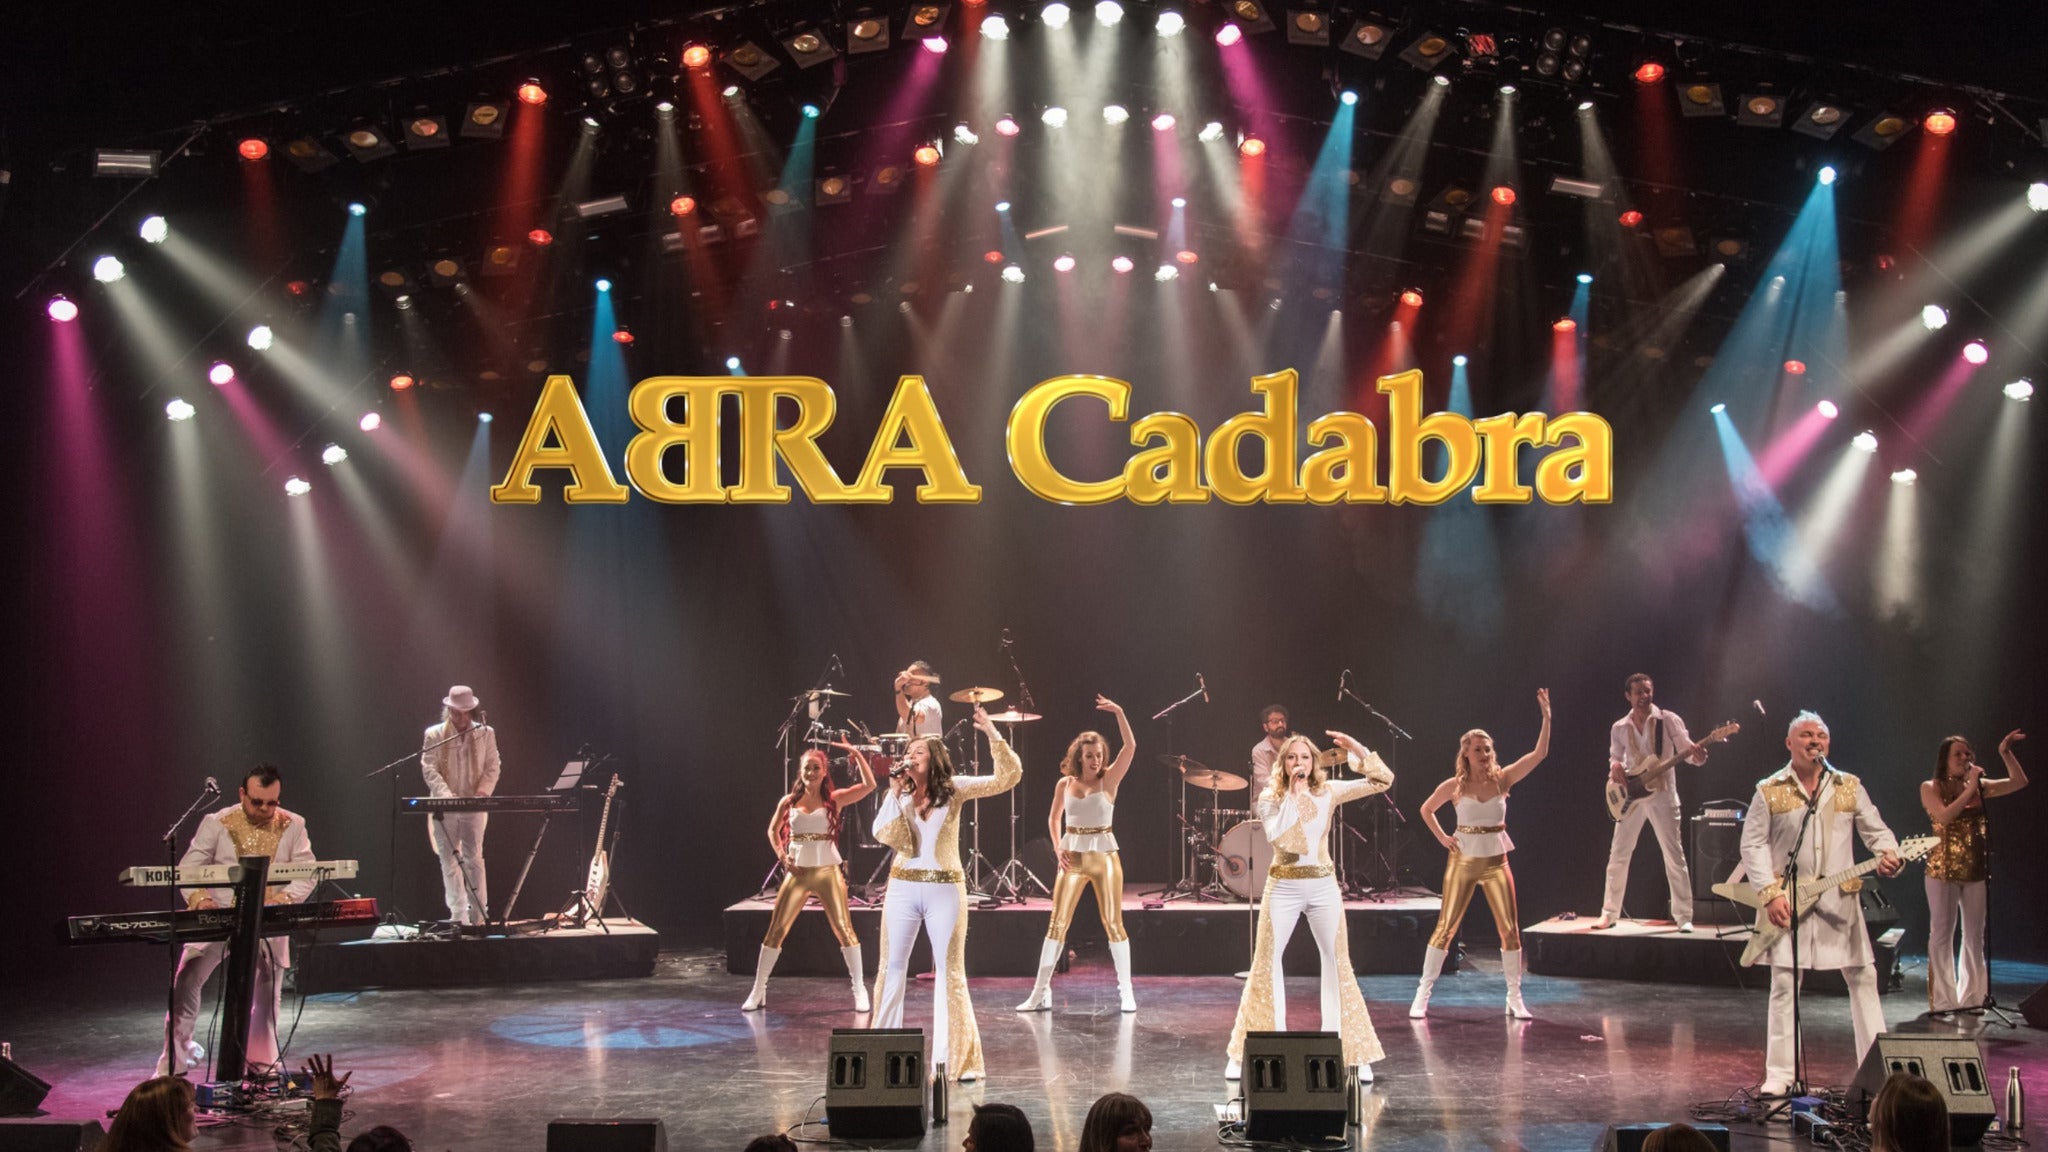 ABRA Cadabra - A Tribute To The Music And Magic Of Abba in Richmond promo photo for Subscribers presale offer code